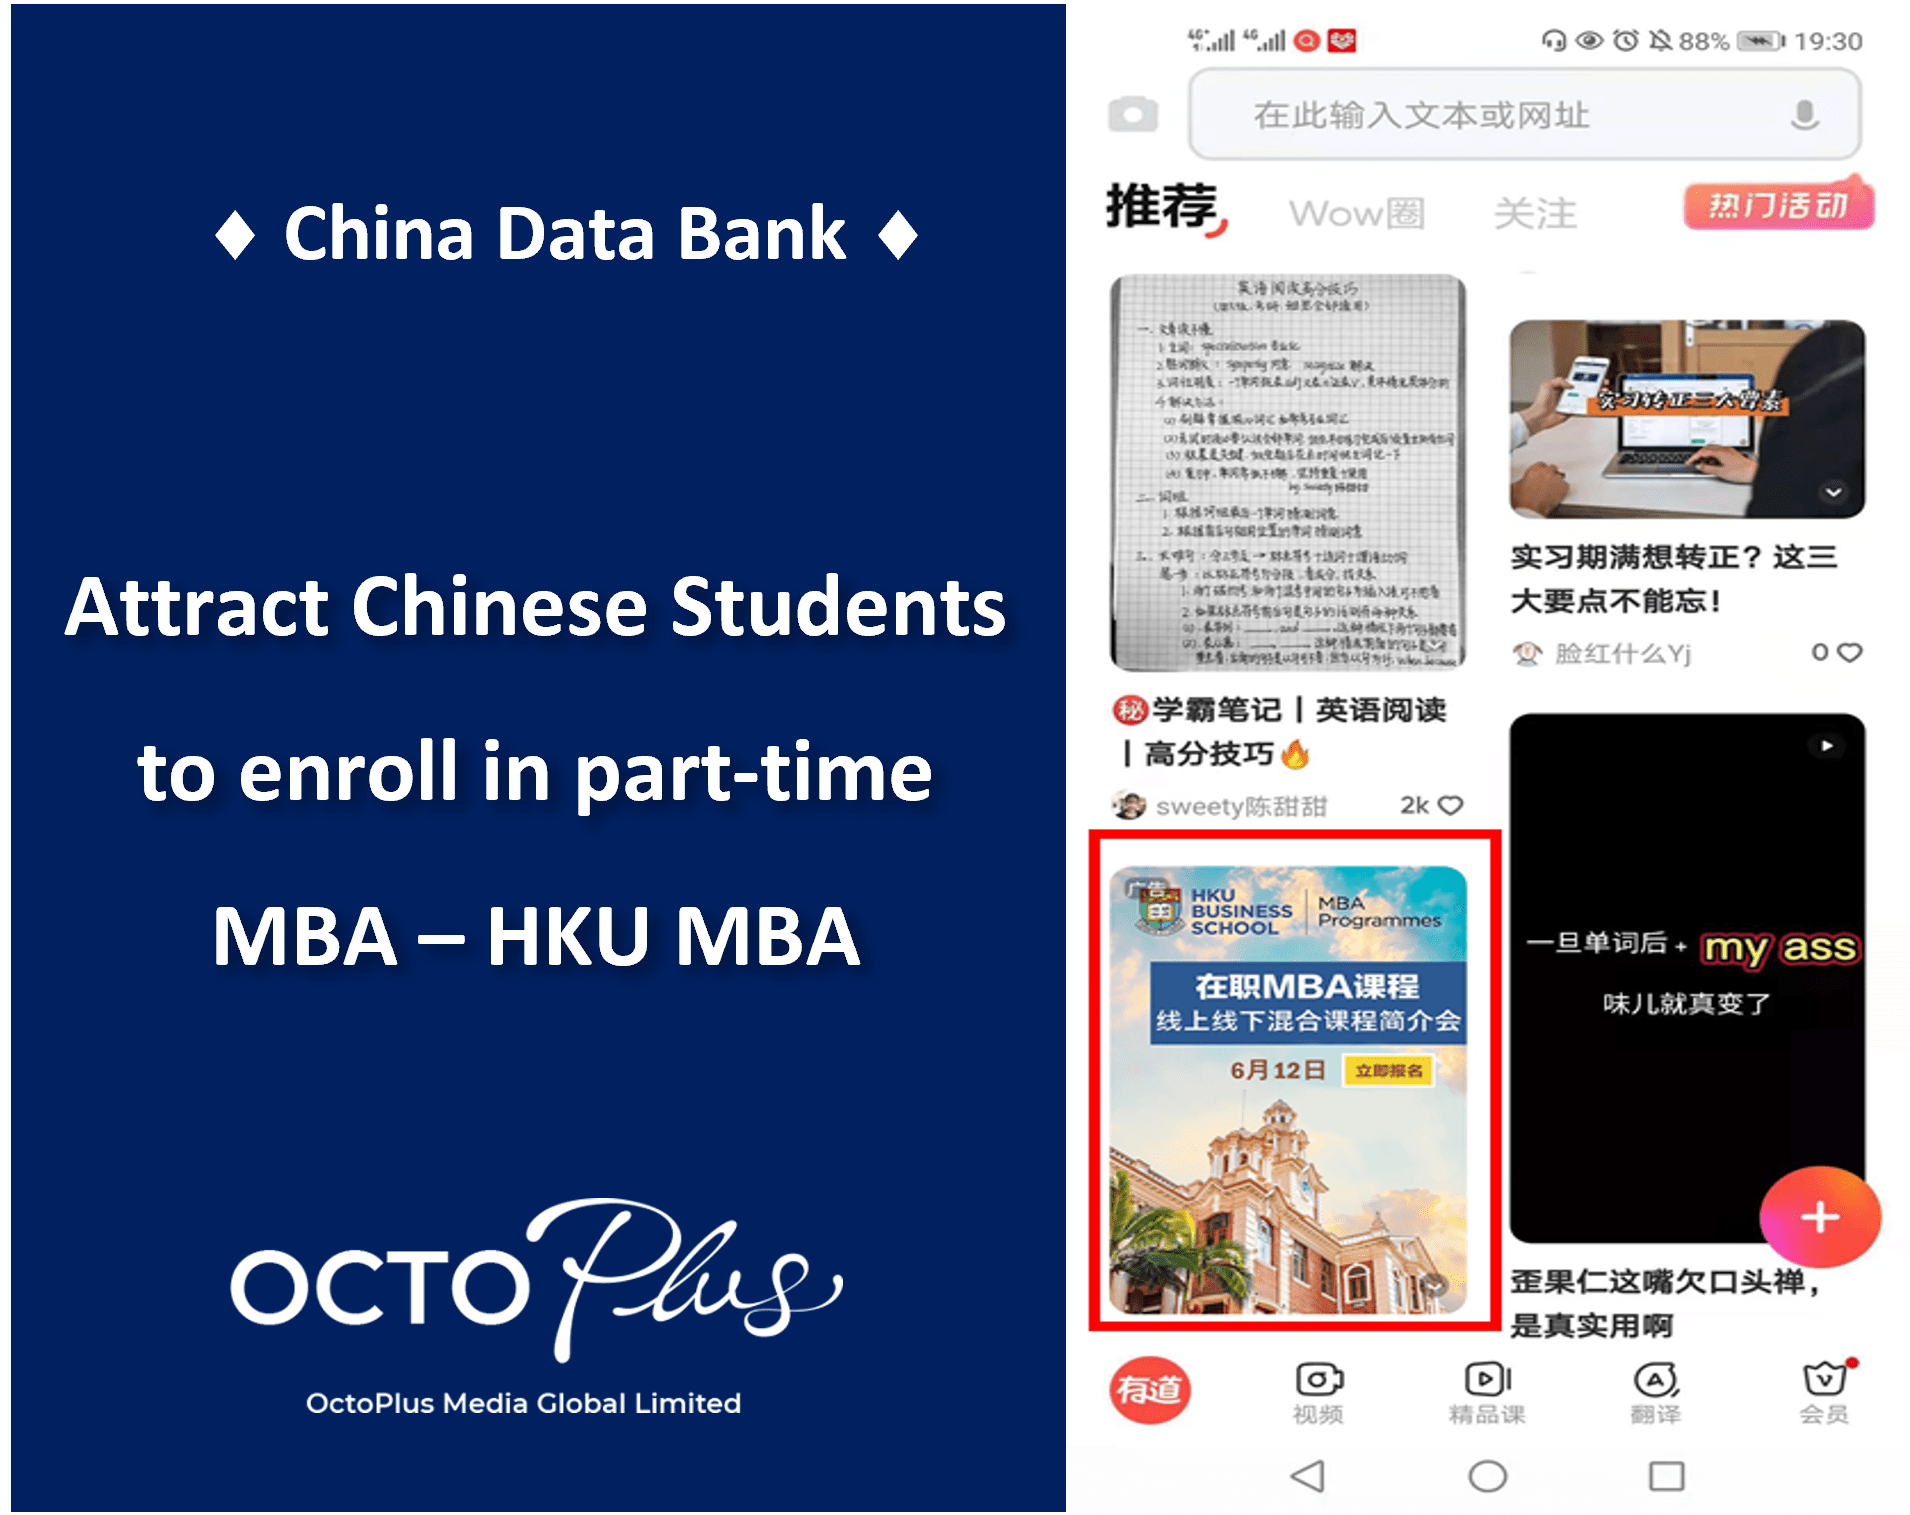 marketing to chinese students, part time mba marketing, mba marketing